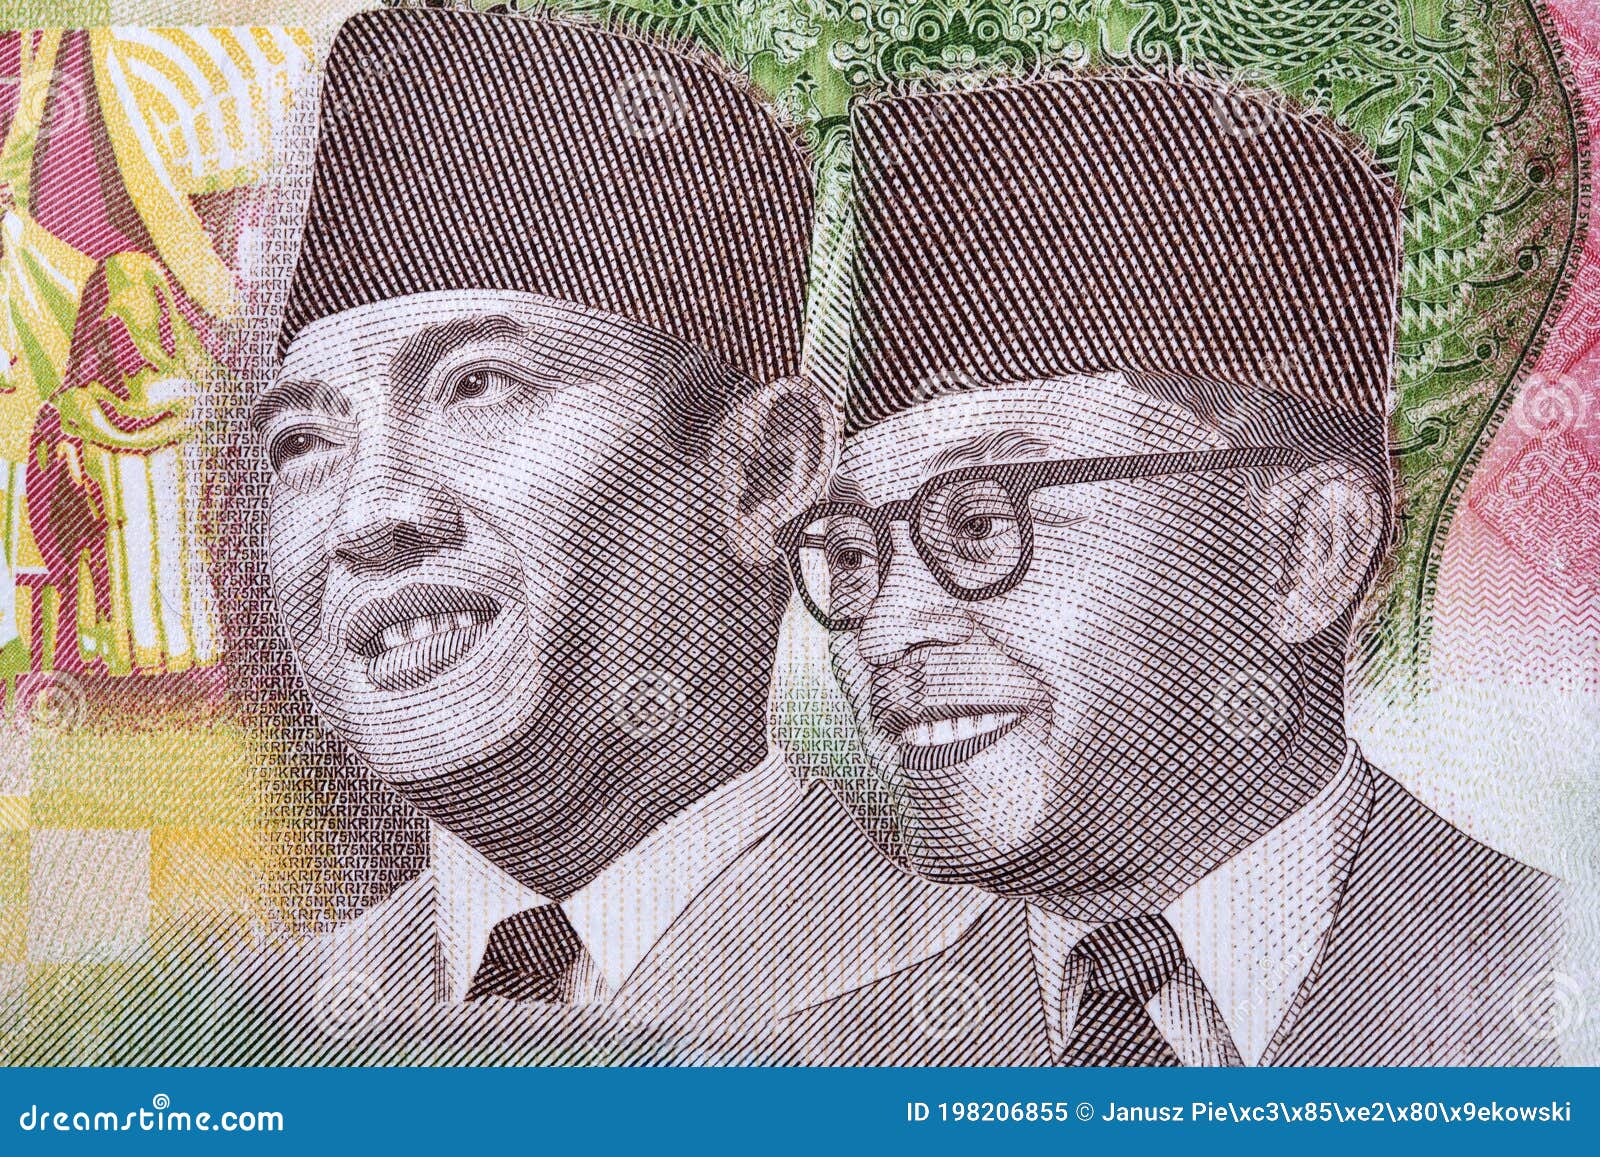 Details about   2014 INDONESIA 100,000 100000 RUPIAH P-153e UNC > ACHMED SUKARNO MOHAMMED HATTA 